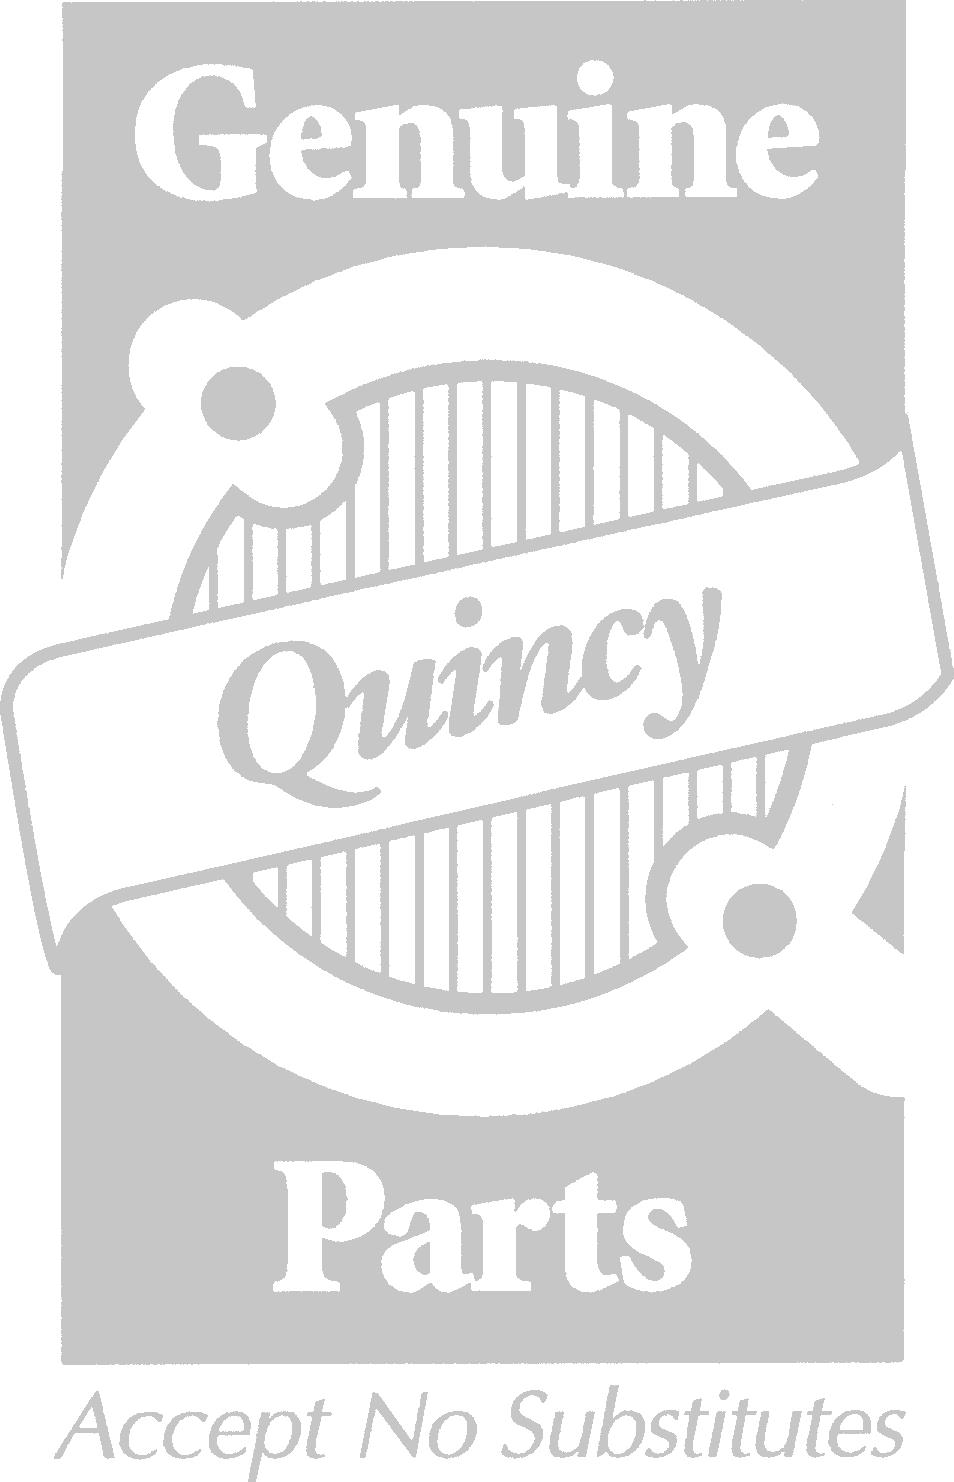 Quincy Service is always near. There are authorized Quincy Distributors located throughout the United States & Canada that stock genuine Quincy parts & accessories for a wide range of Quincy products.